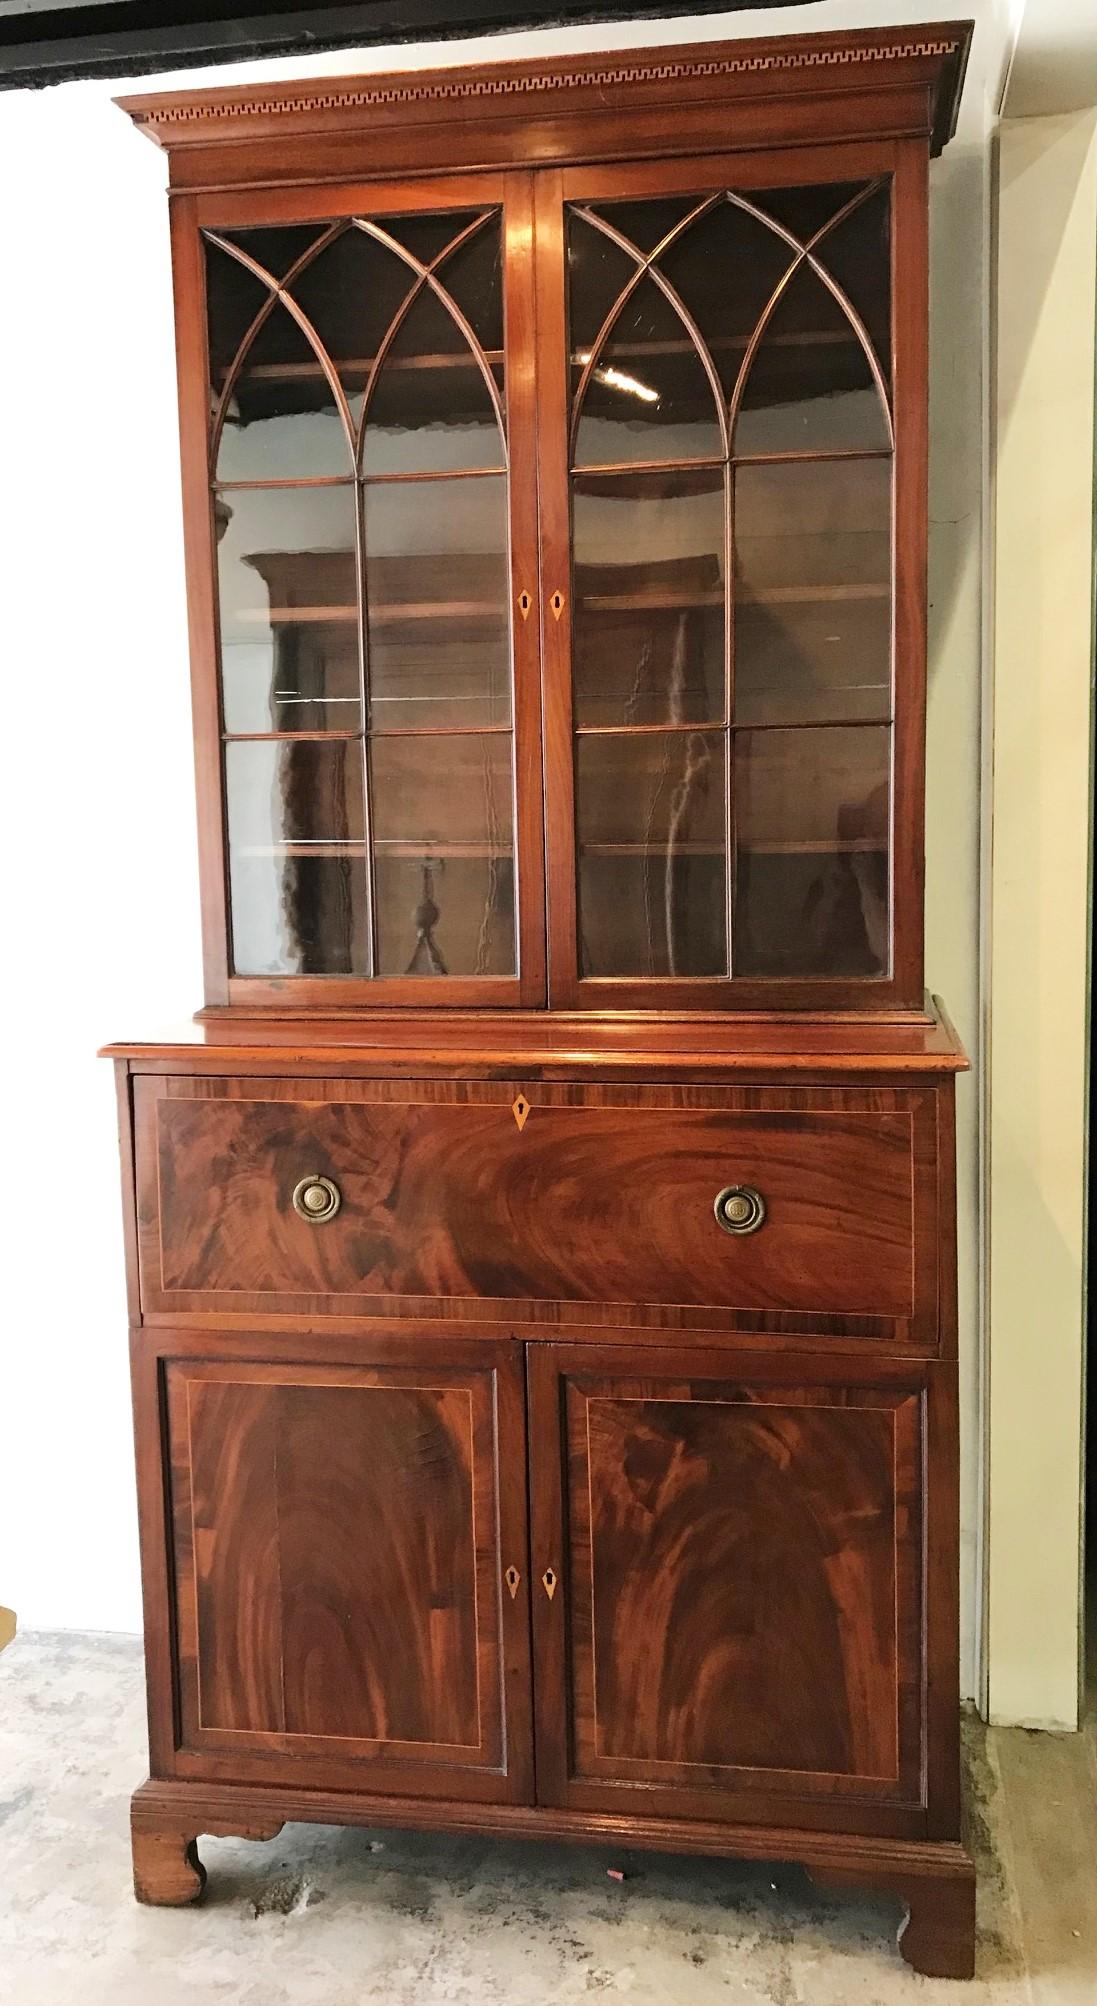 Hand-Crafted Neo-Gothic Early 19th Century Classical English Regency Bookcase Secretary Desk For Sale